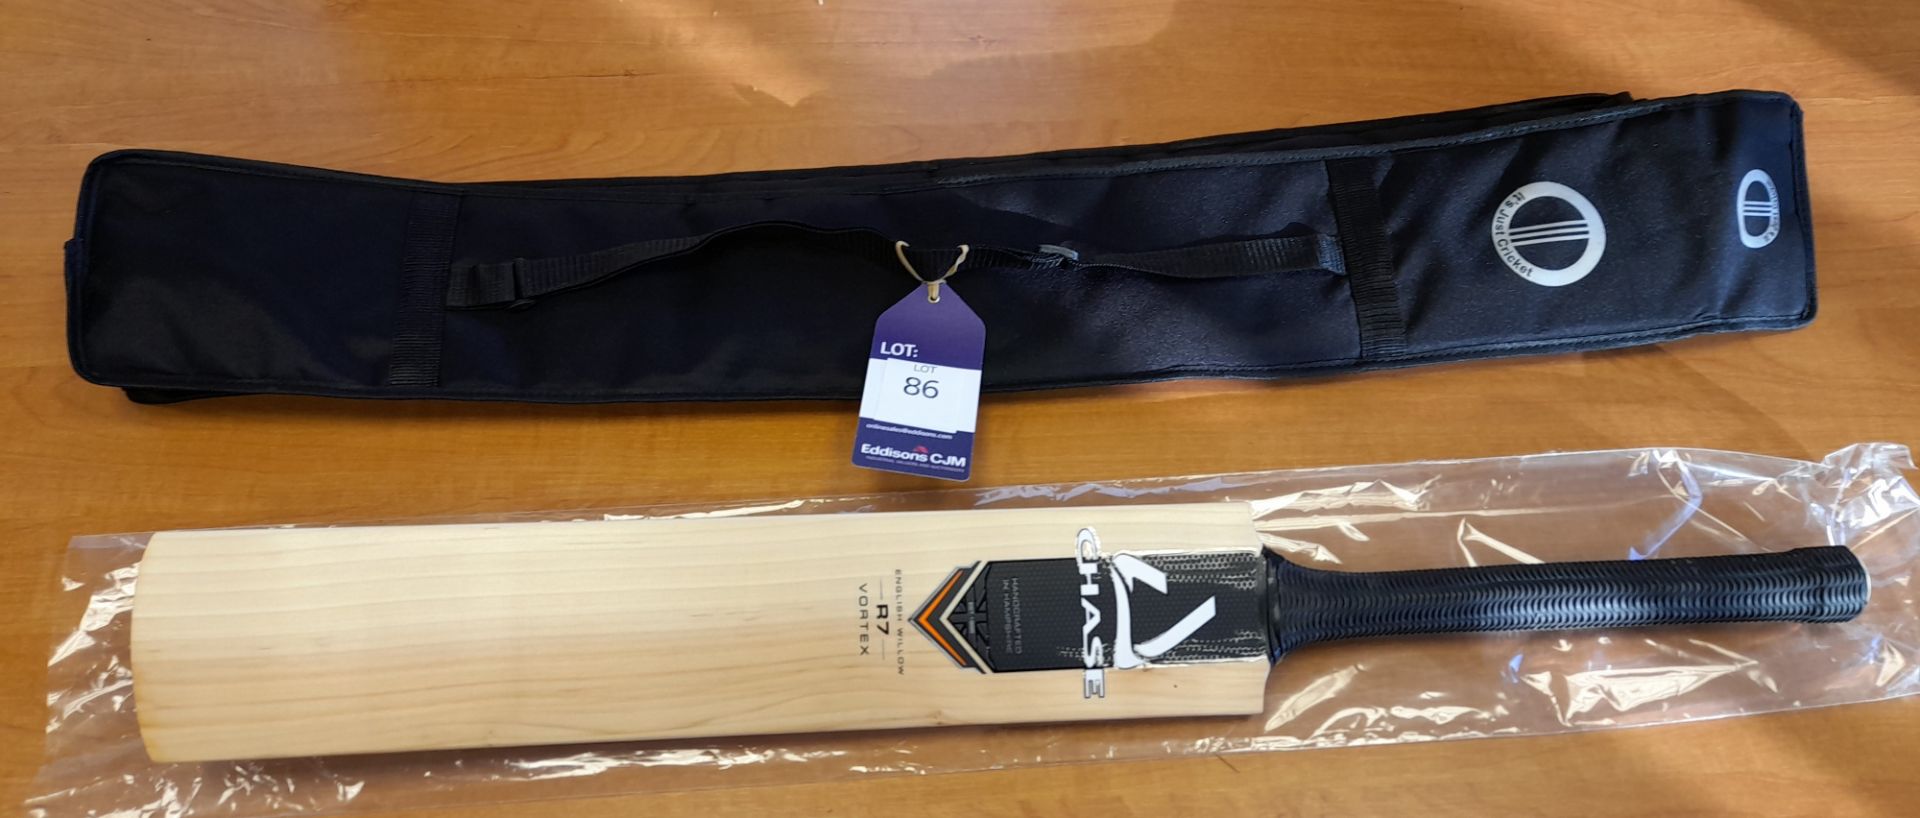 Chase R7 Vortex Cricket Bat Size SH with Bat Cover Rrp. £224.99 - Image 2 of 3